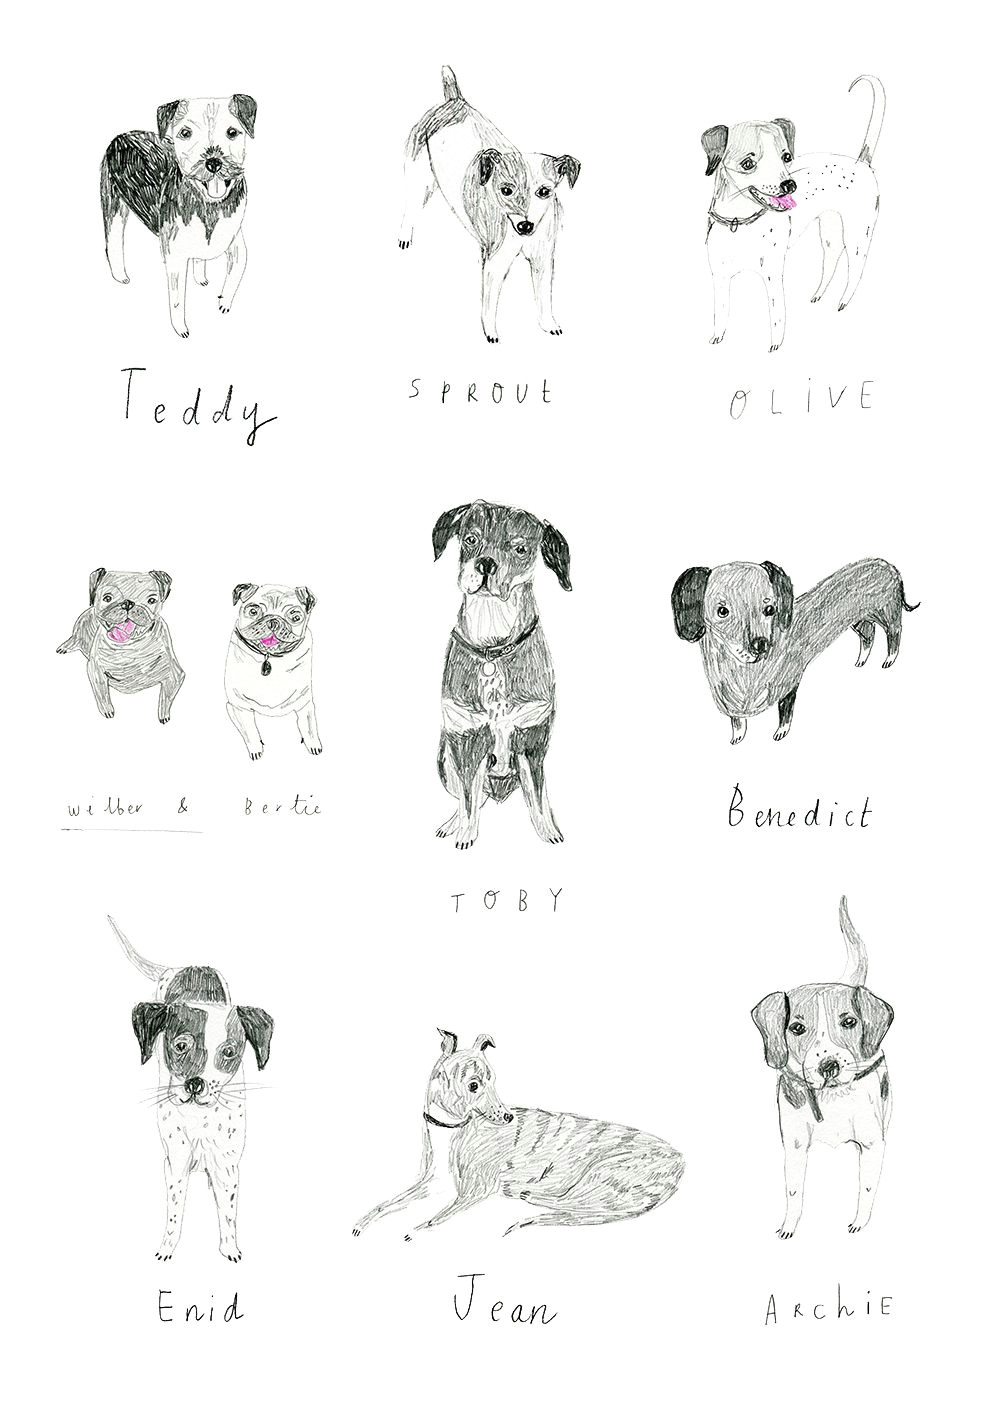 A Simple Drawing Of A Dog Pin by Girl Scout On Illustrate In 2019 Drawings Illustration